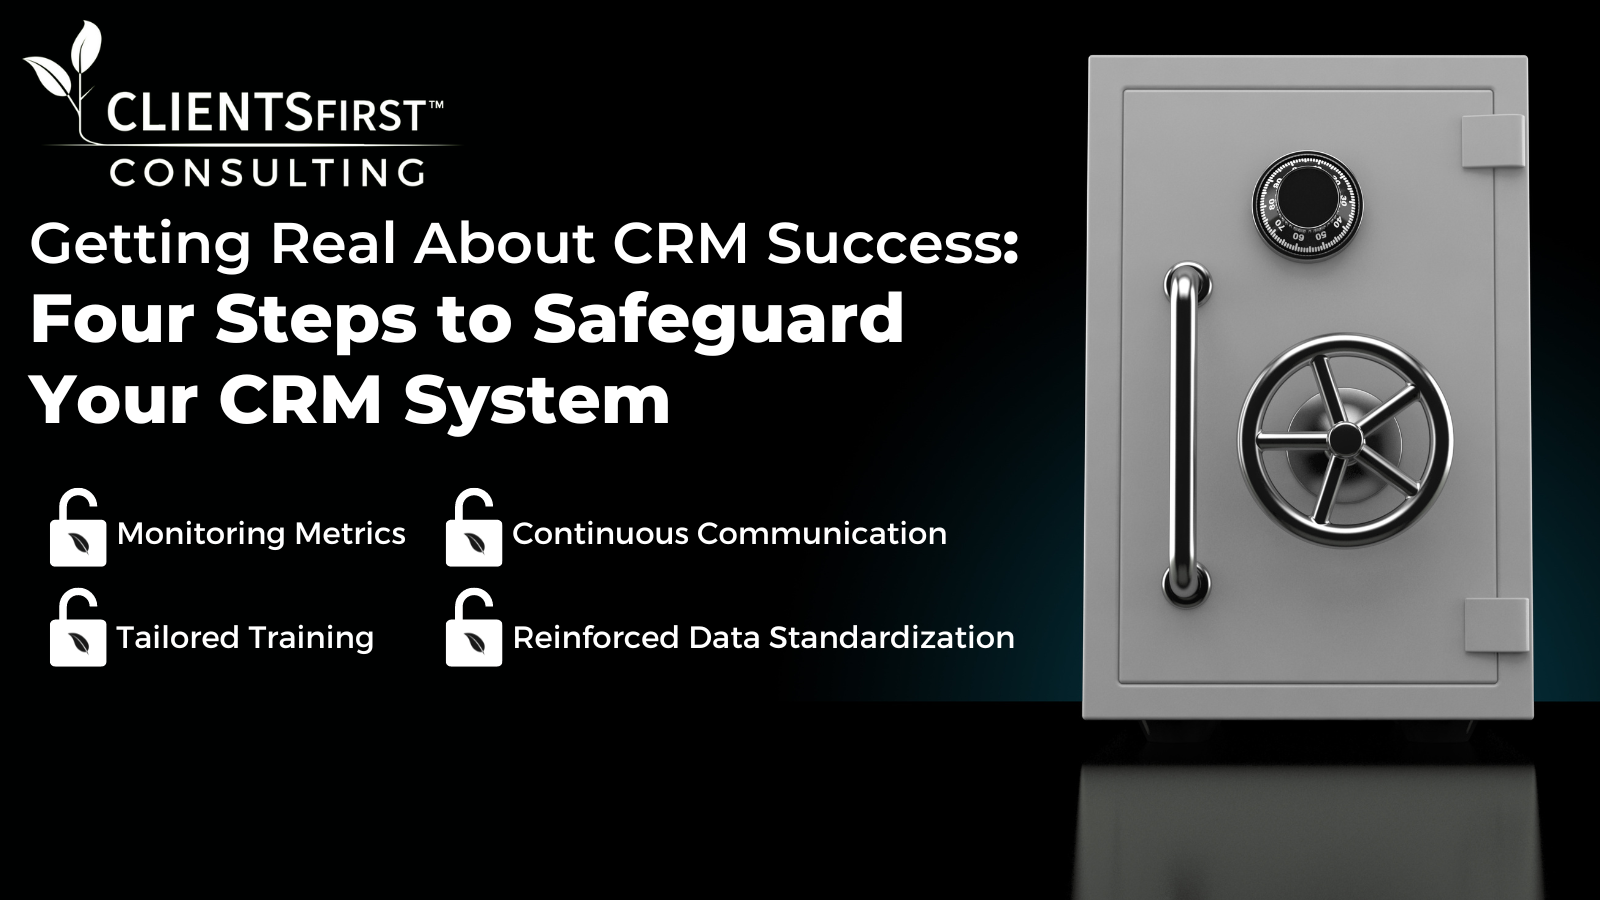 Getting Real About CRM Success: Four Steps To Safeguard Your CRM System